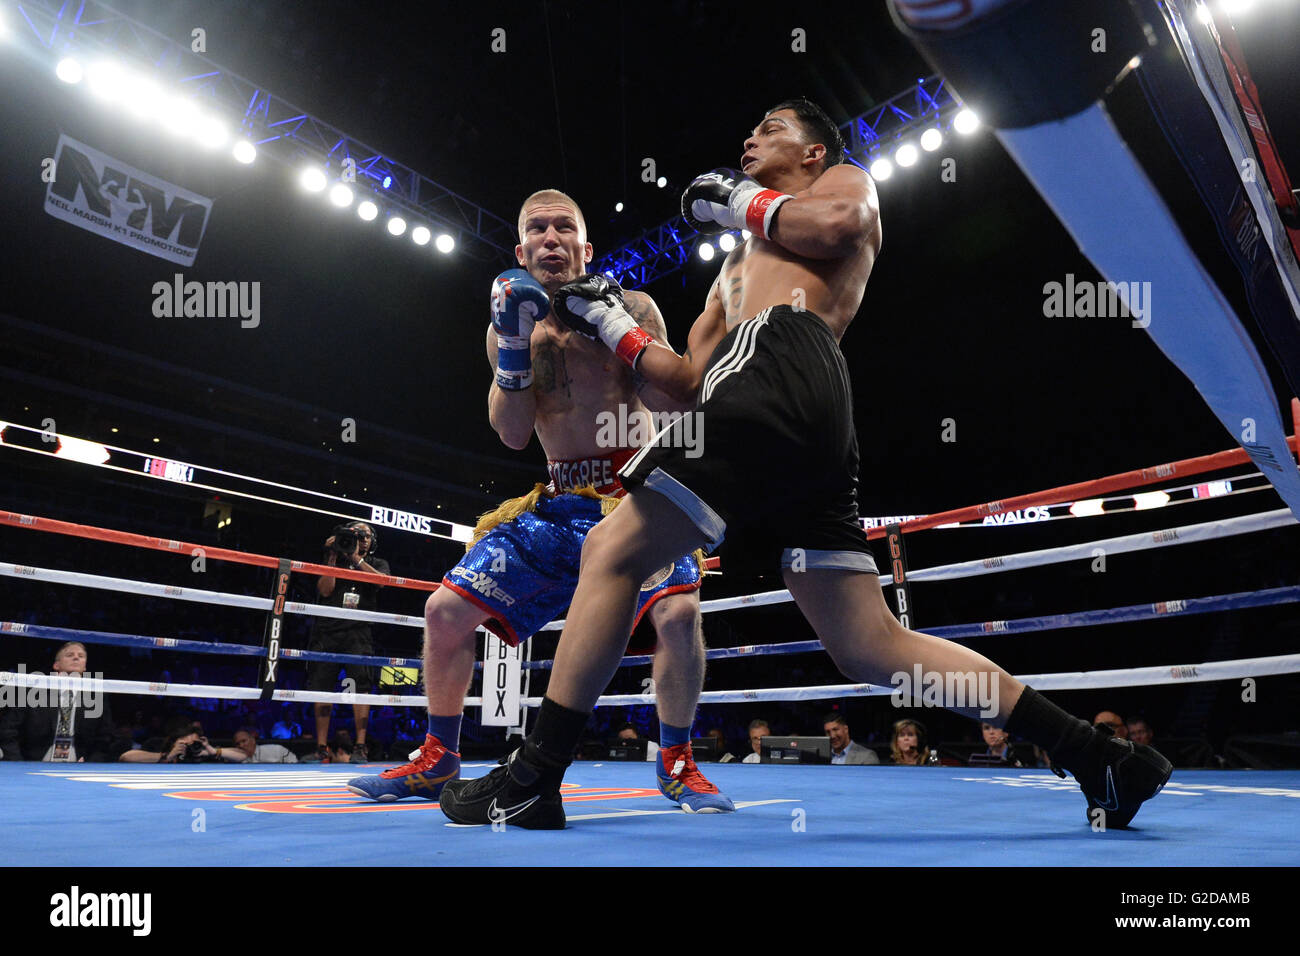 May 28, 2016; Clay Burns (blue trunks) and Isaac Avalos (black trunks) box during their lightweight boxing match at Gila River Arena in Glendale, AZ. Burns won via second round TKO. Joe Camporeale/Cal Sport Media Stock Photo